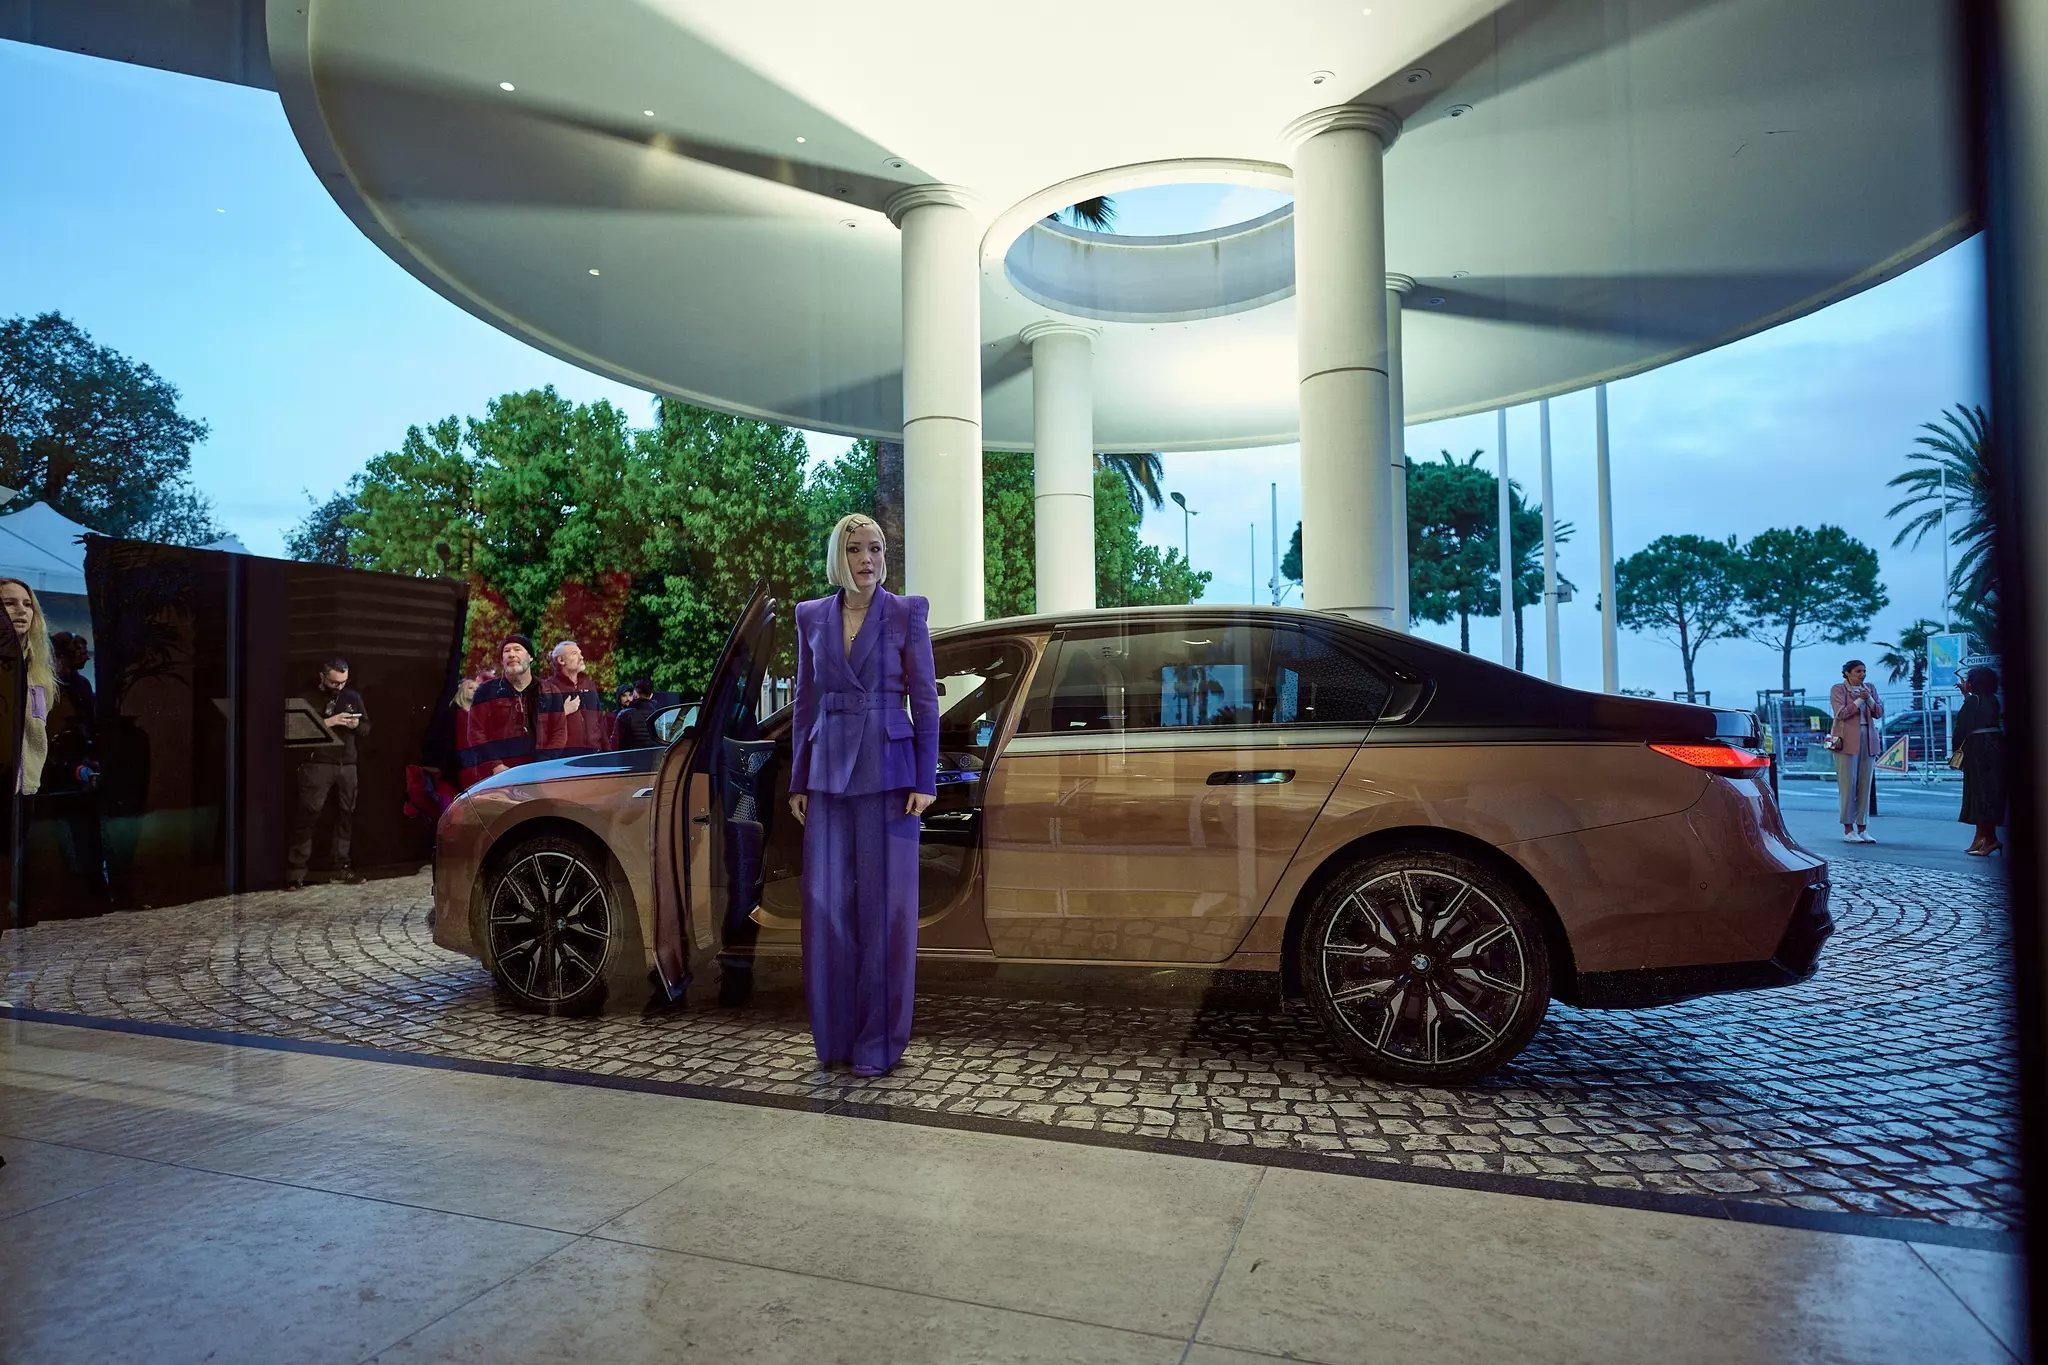 BMW filmed an action-packed short film with Uma Thurman